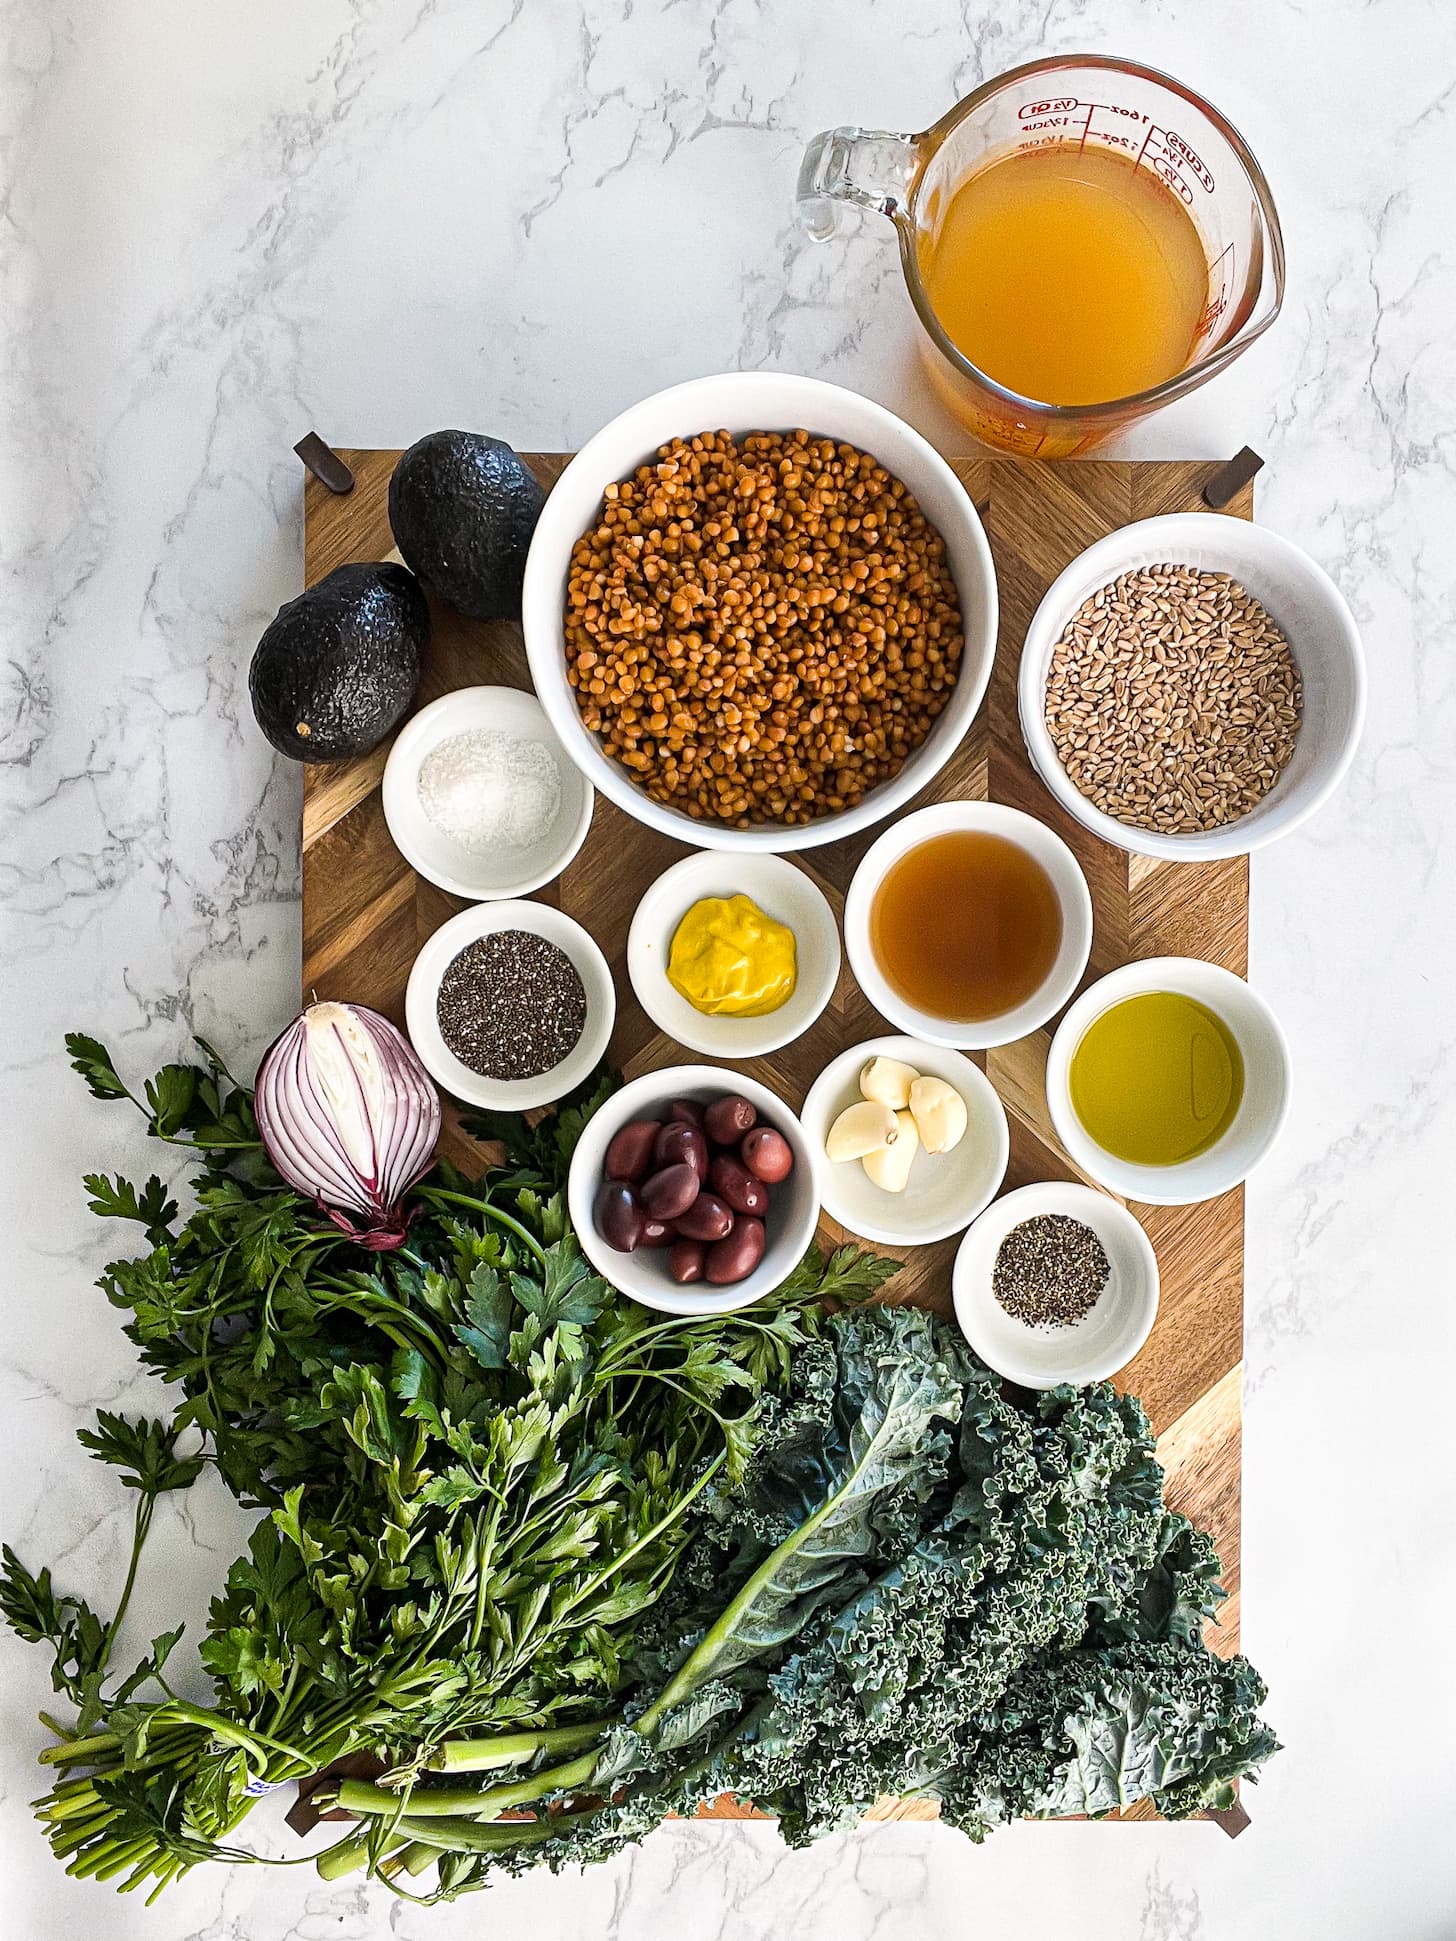 a variety of food ingredients - such as greens, lentils and herbs - beautifully arranged on a wooden board.